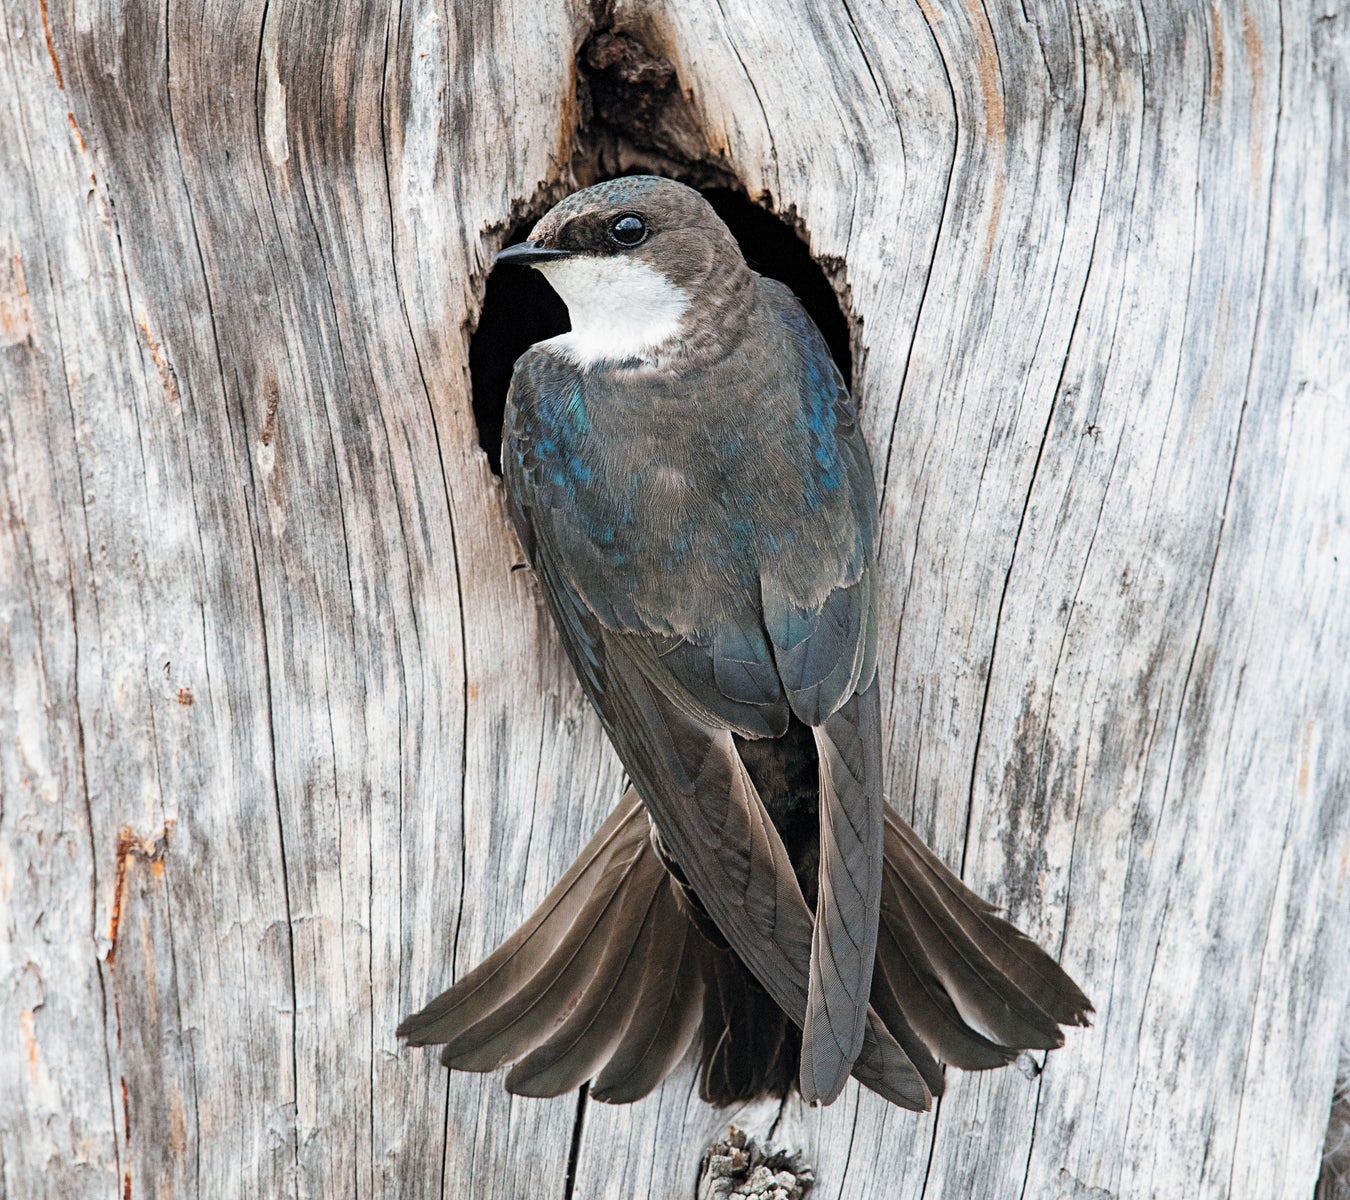 A tree swallow sitting in a hole